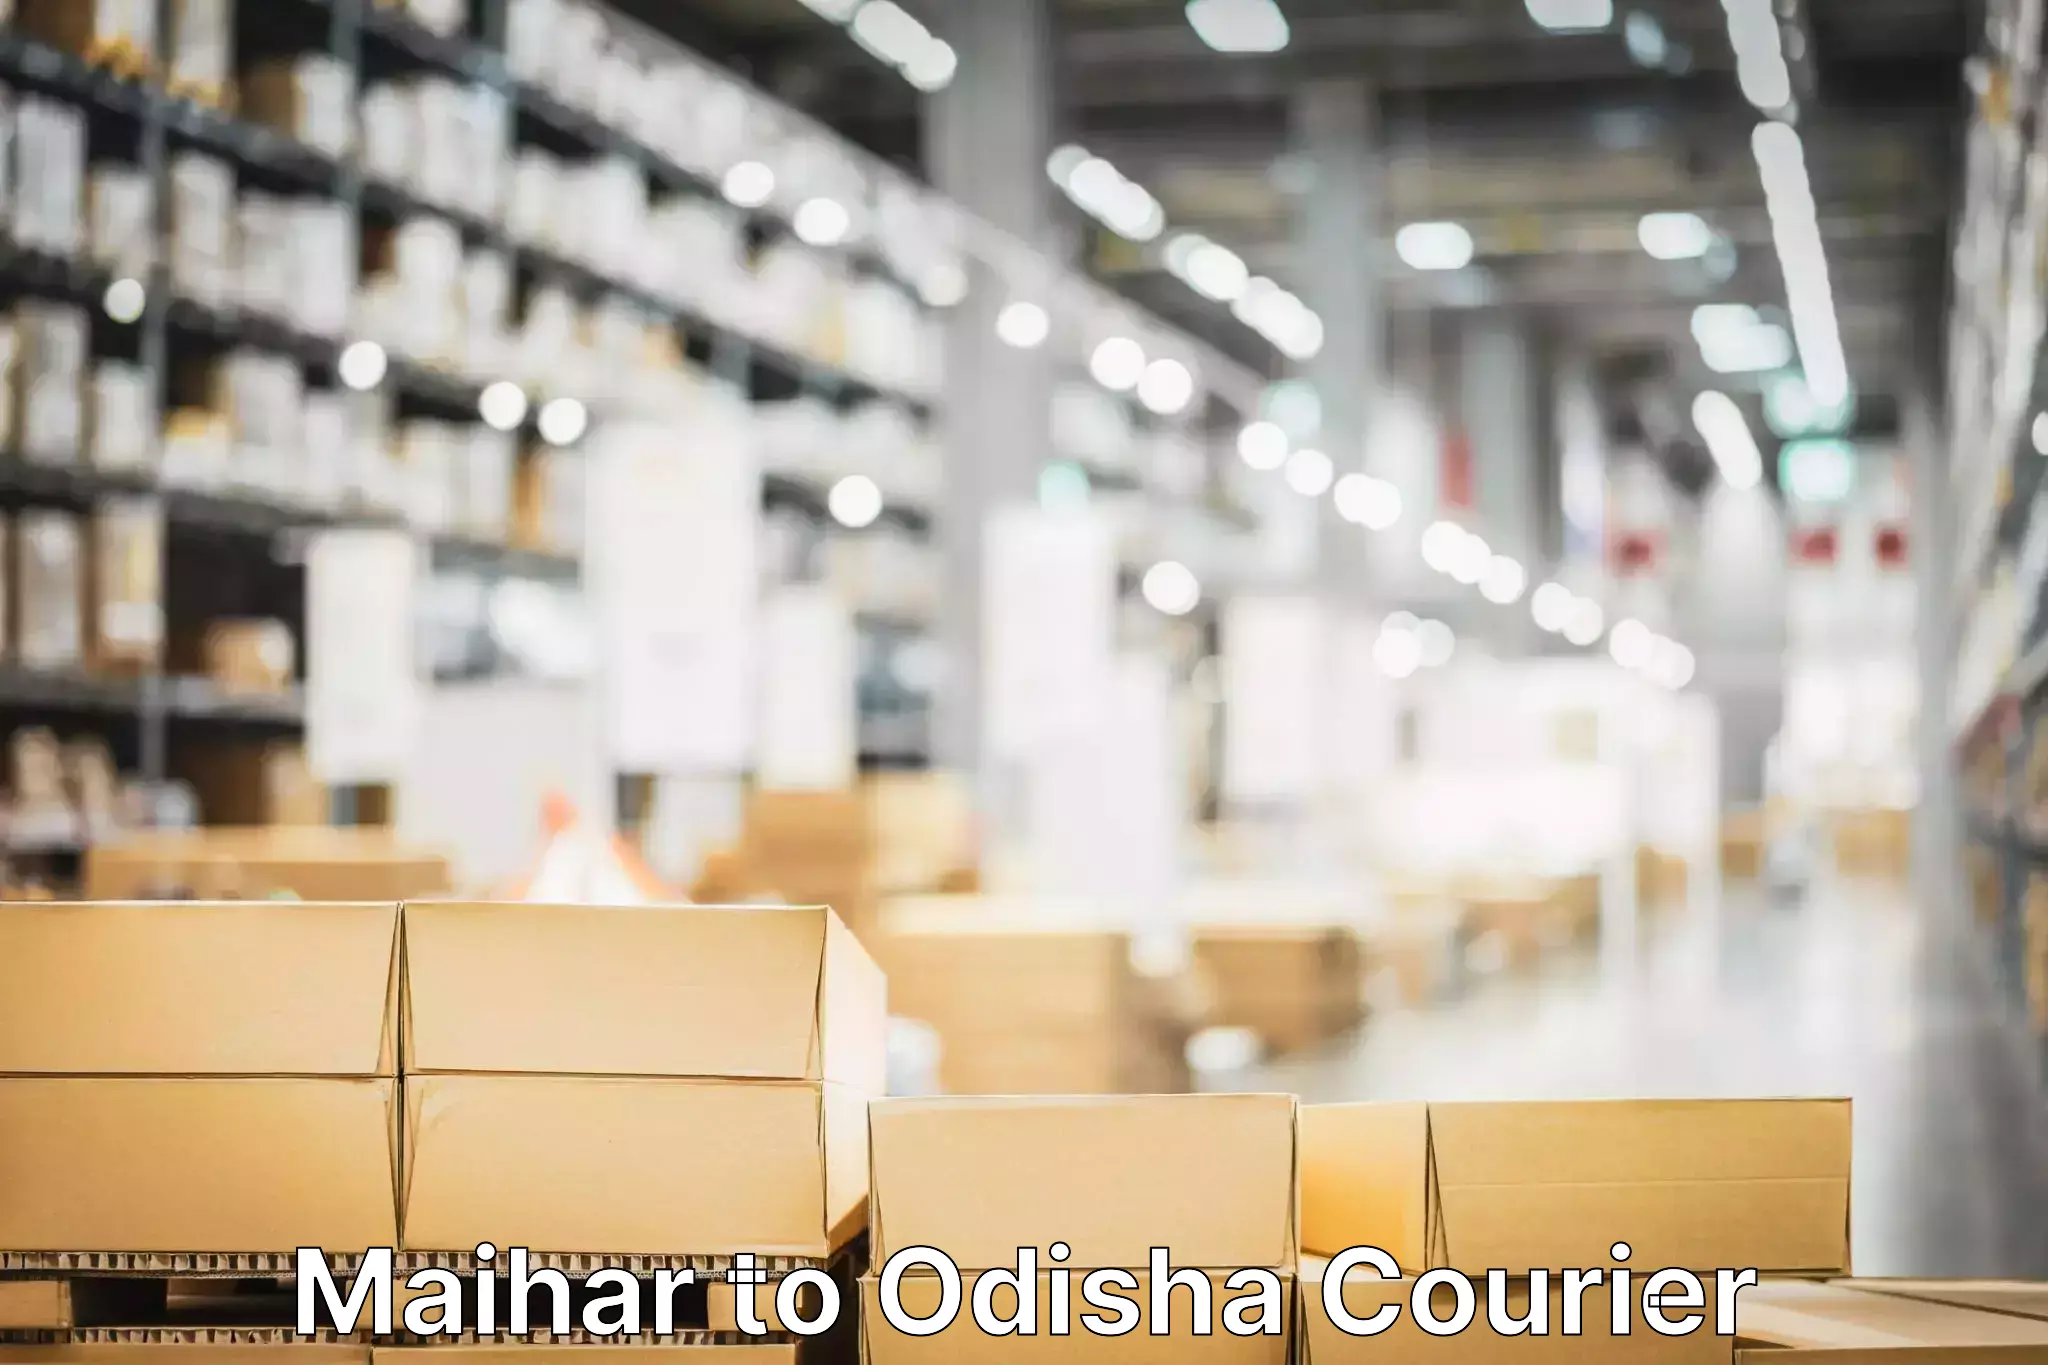 Courier services Maihar to Odisha